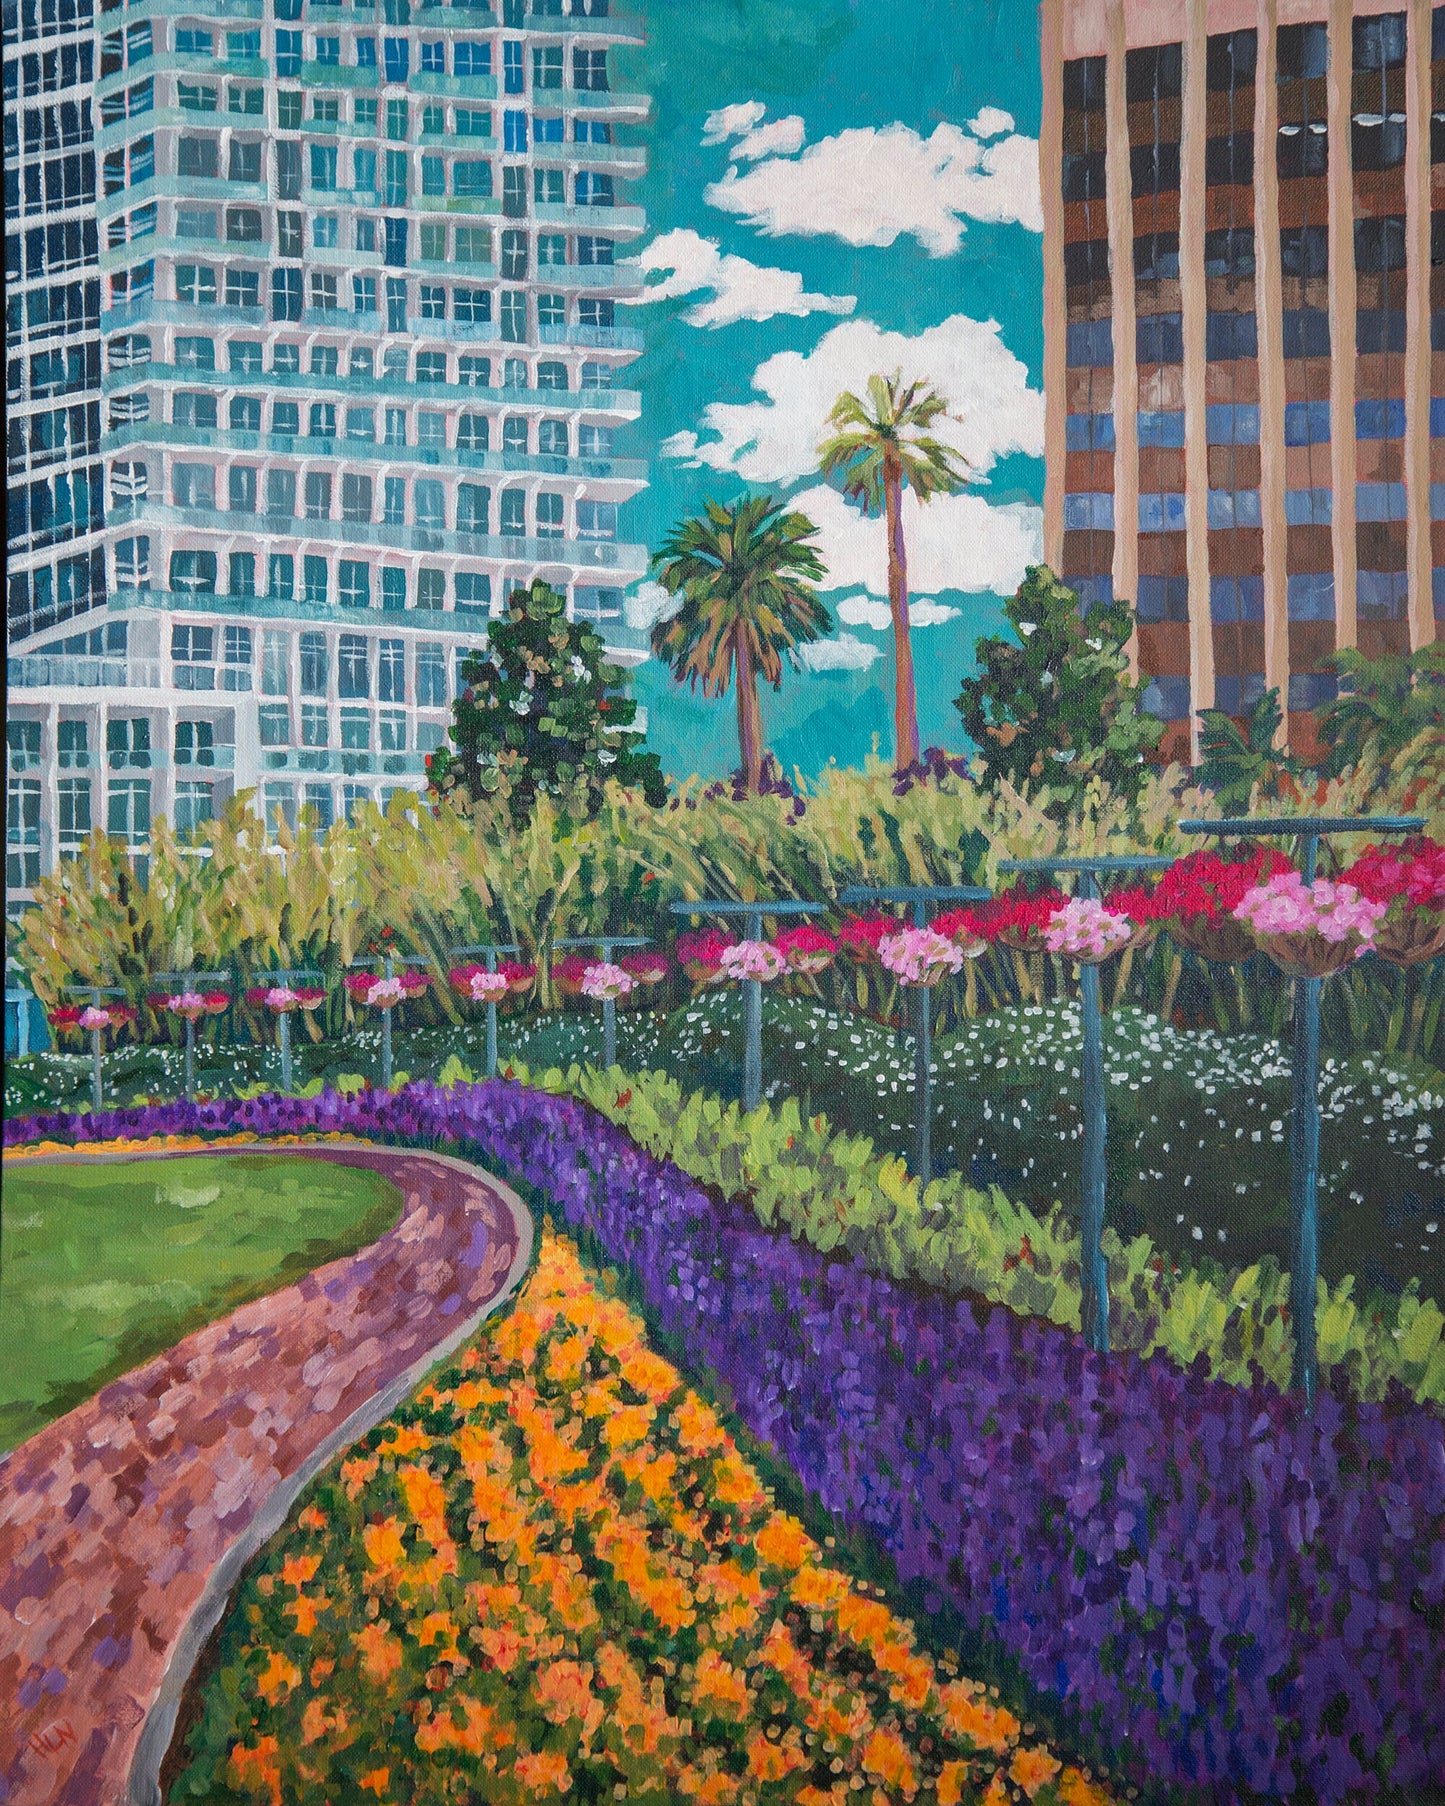 Original vibrant  impressionistic painting of beautiful Lake Eola park in downtown Orlando with the Vue condo building in the background